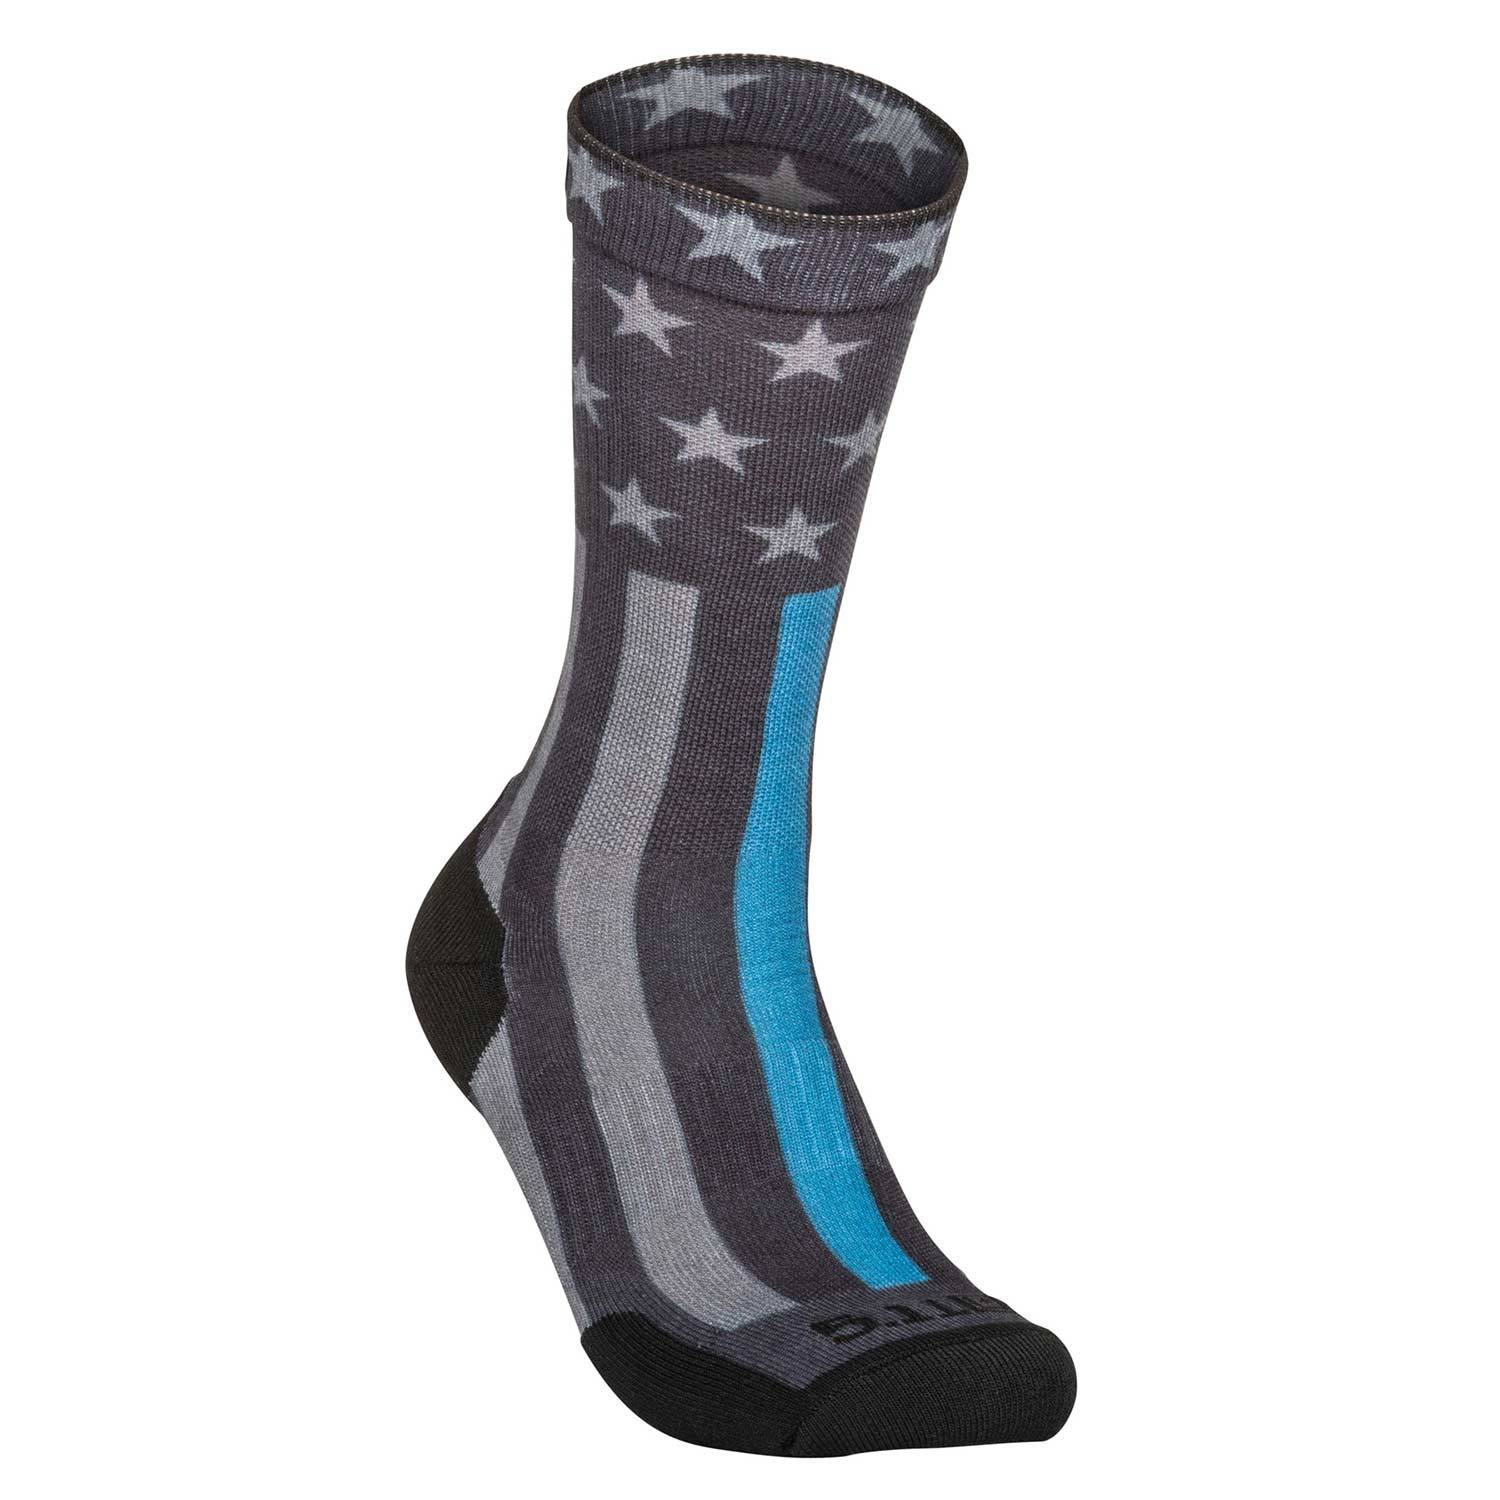 5.11 TACTICAL SOCK AND AWE CREW DAZZLE SOCK